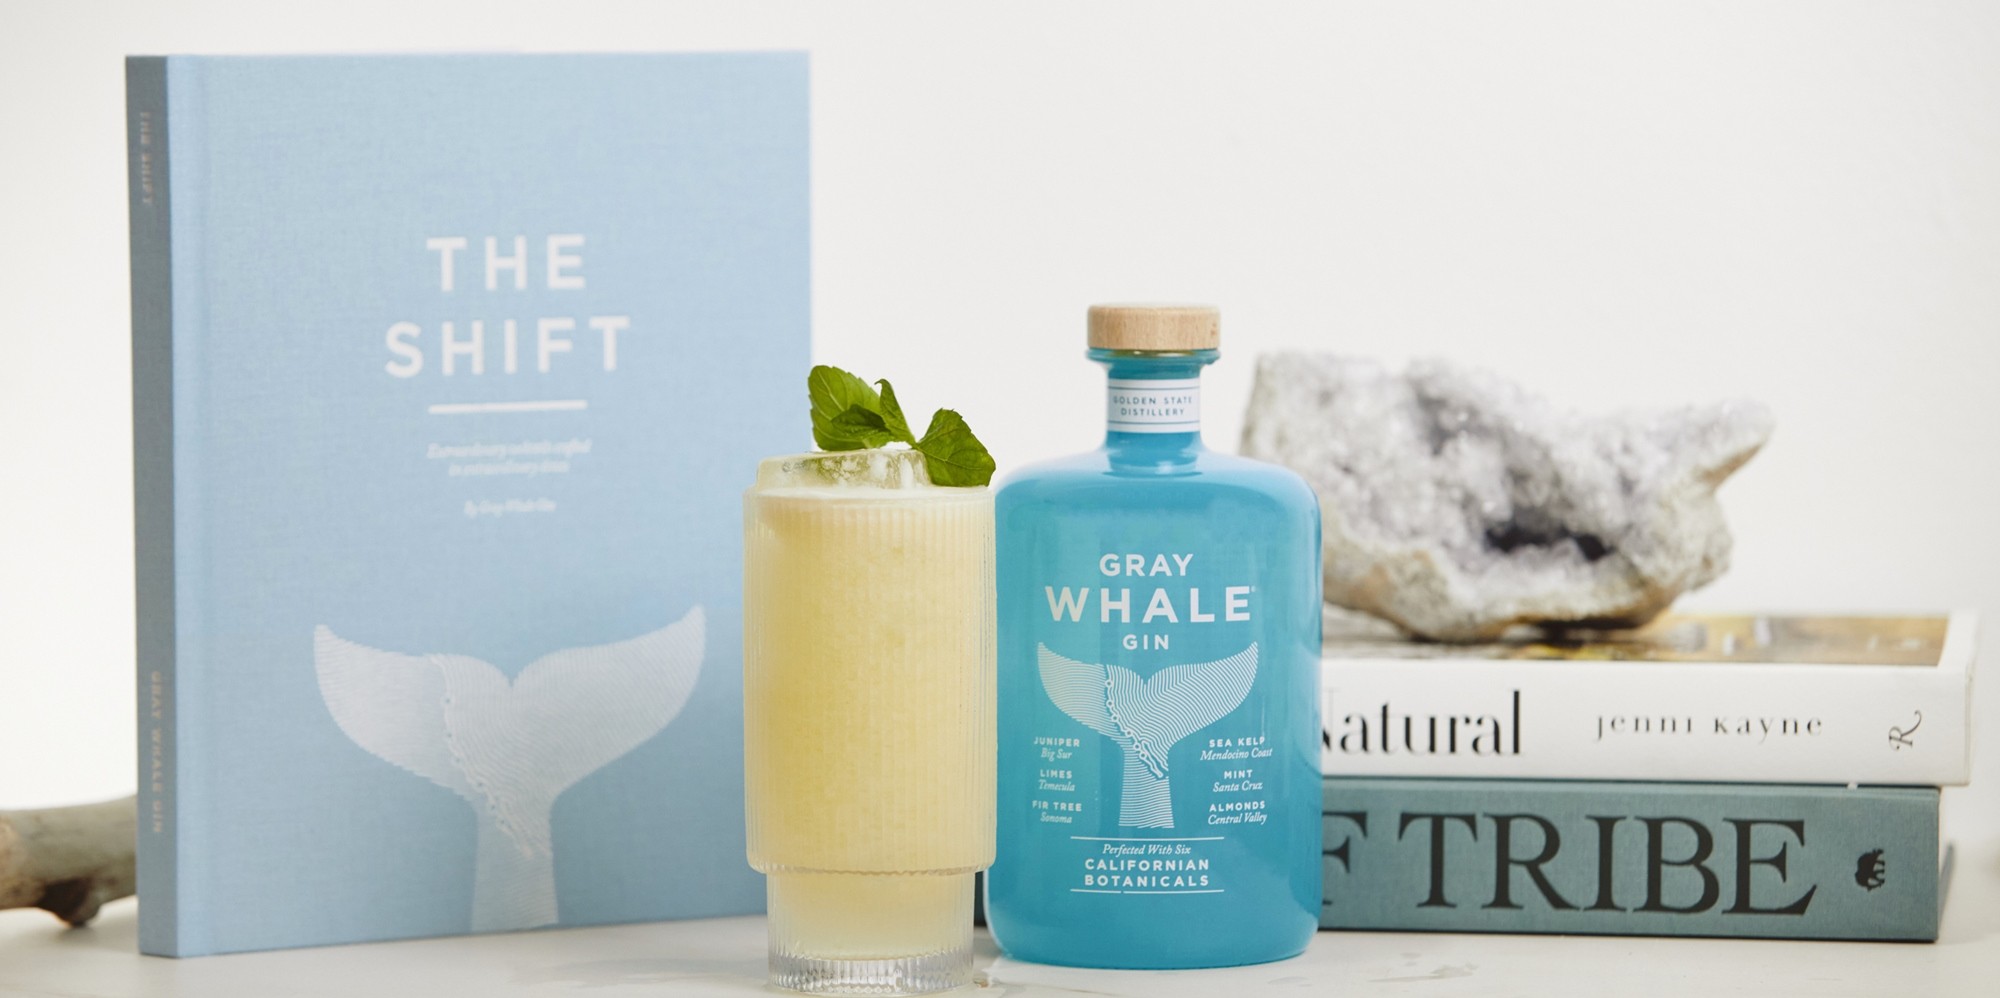 Celebrate World Oceans Day & World Gin Day With Gray Whale Gin